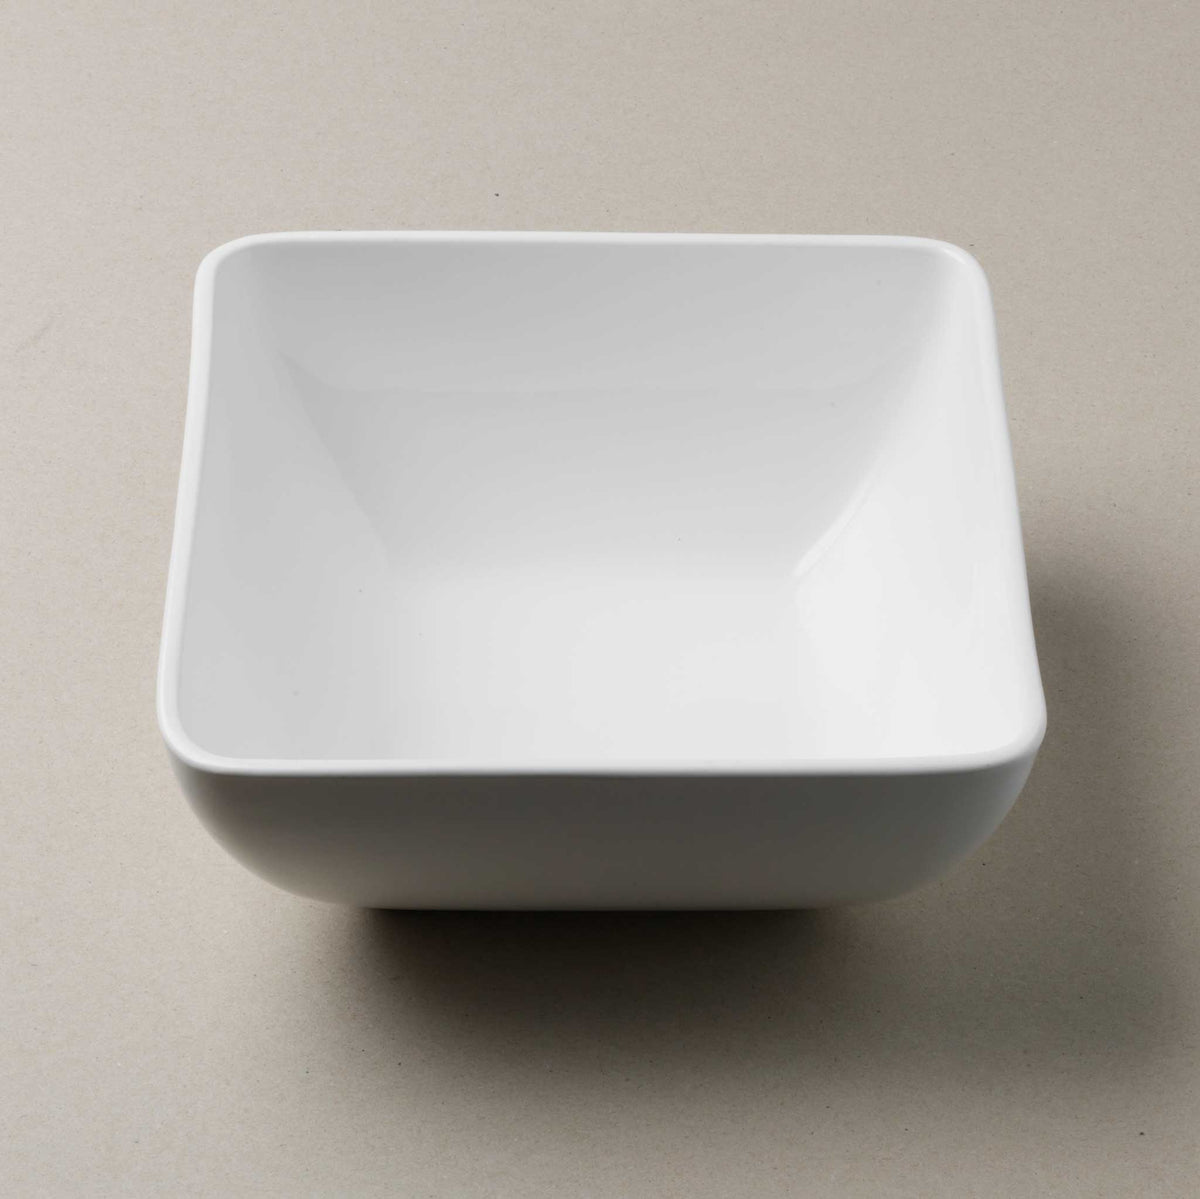 White China Serving Pieces